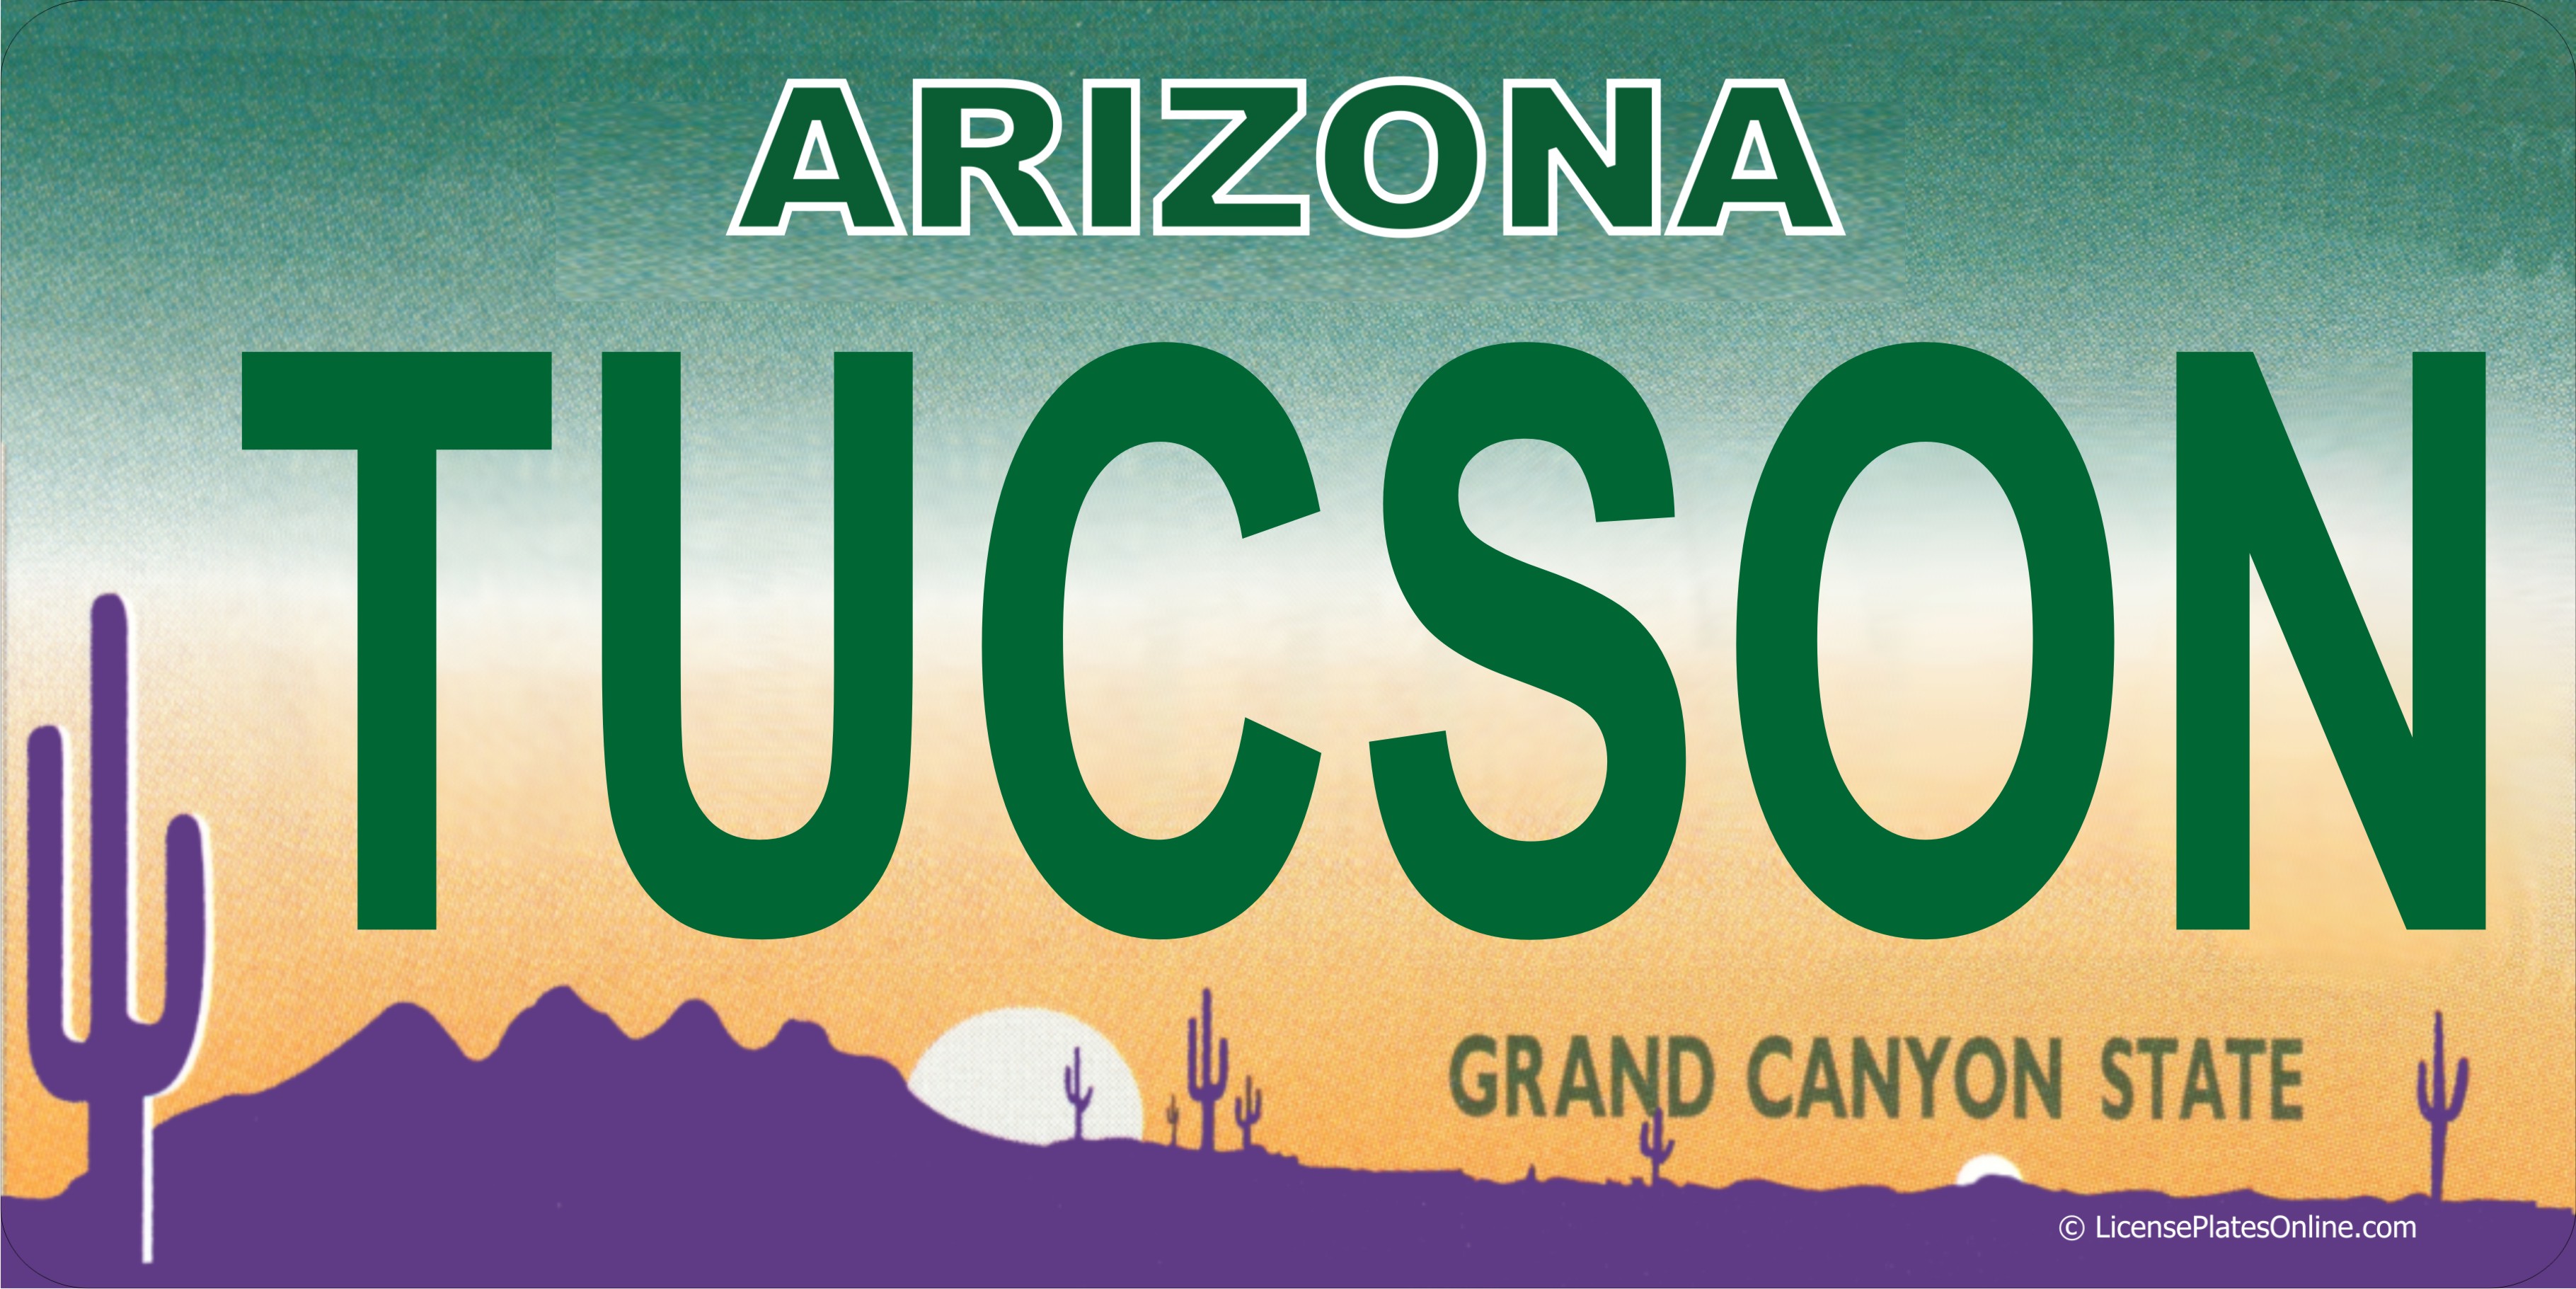 Arizona TUCSON Photo LICENSE PLATE   Free Personalization on this PLATE